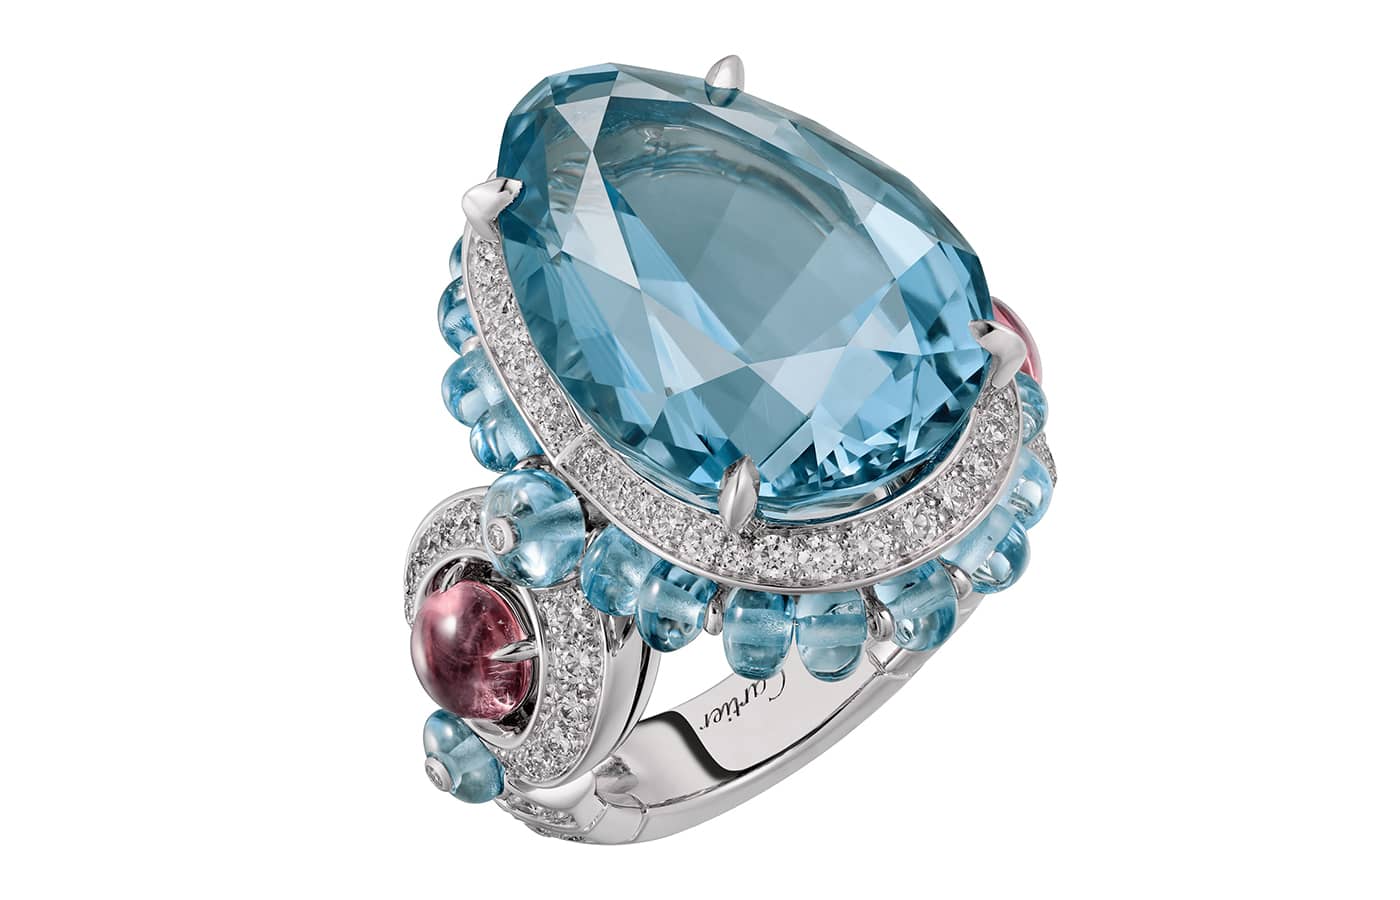 Cartier High Jewellery ring in platinum, aquamarines, featuring a 22.78-ct pear-shaped aquamarine, rubellites and diamonds from the Cartier Beautés du Monde Chapter III High Jewellery collection